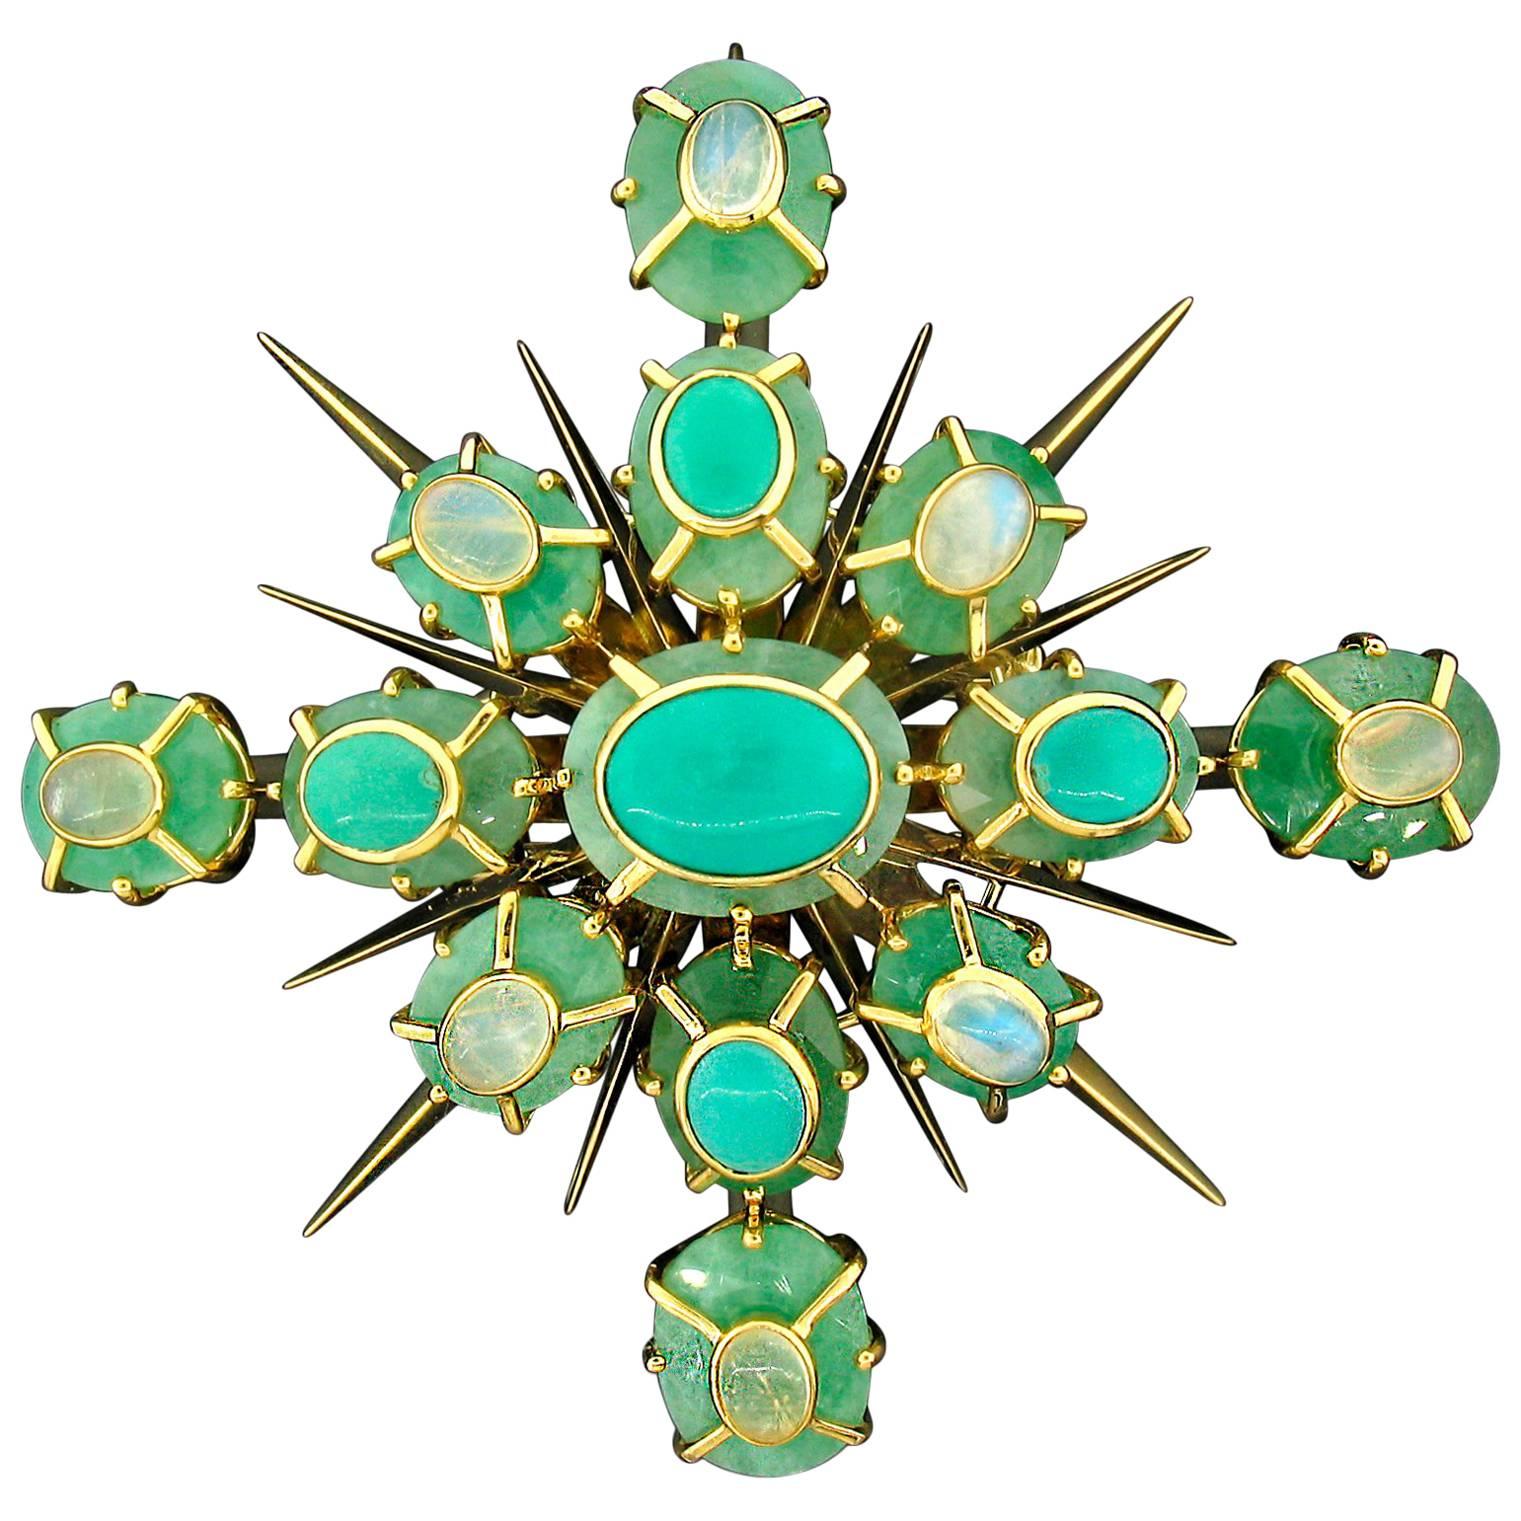 Emerald, Turquoise and Moonstone Brooch or Pendant by Tony Duquette